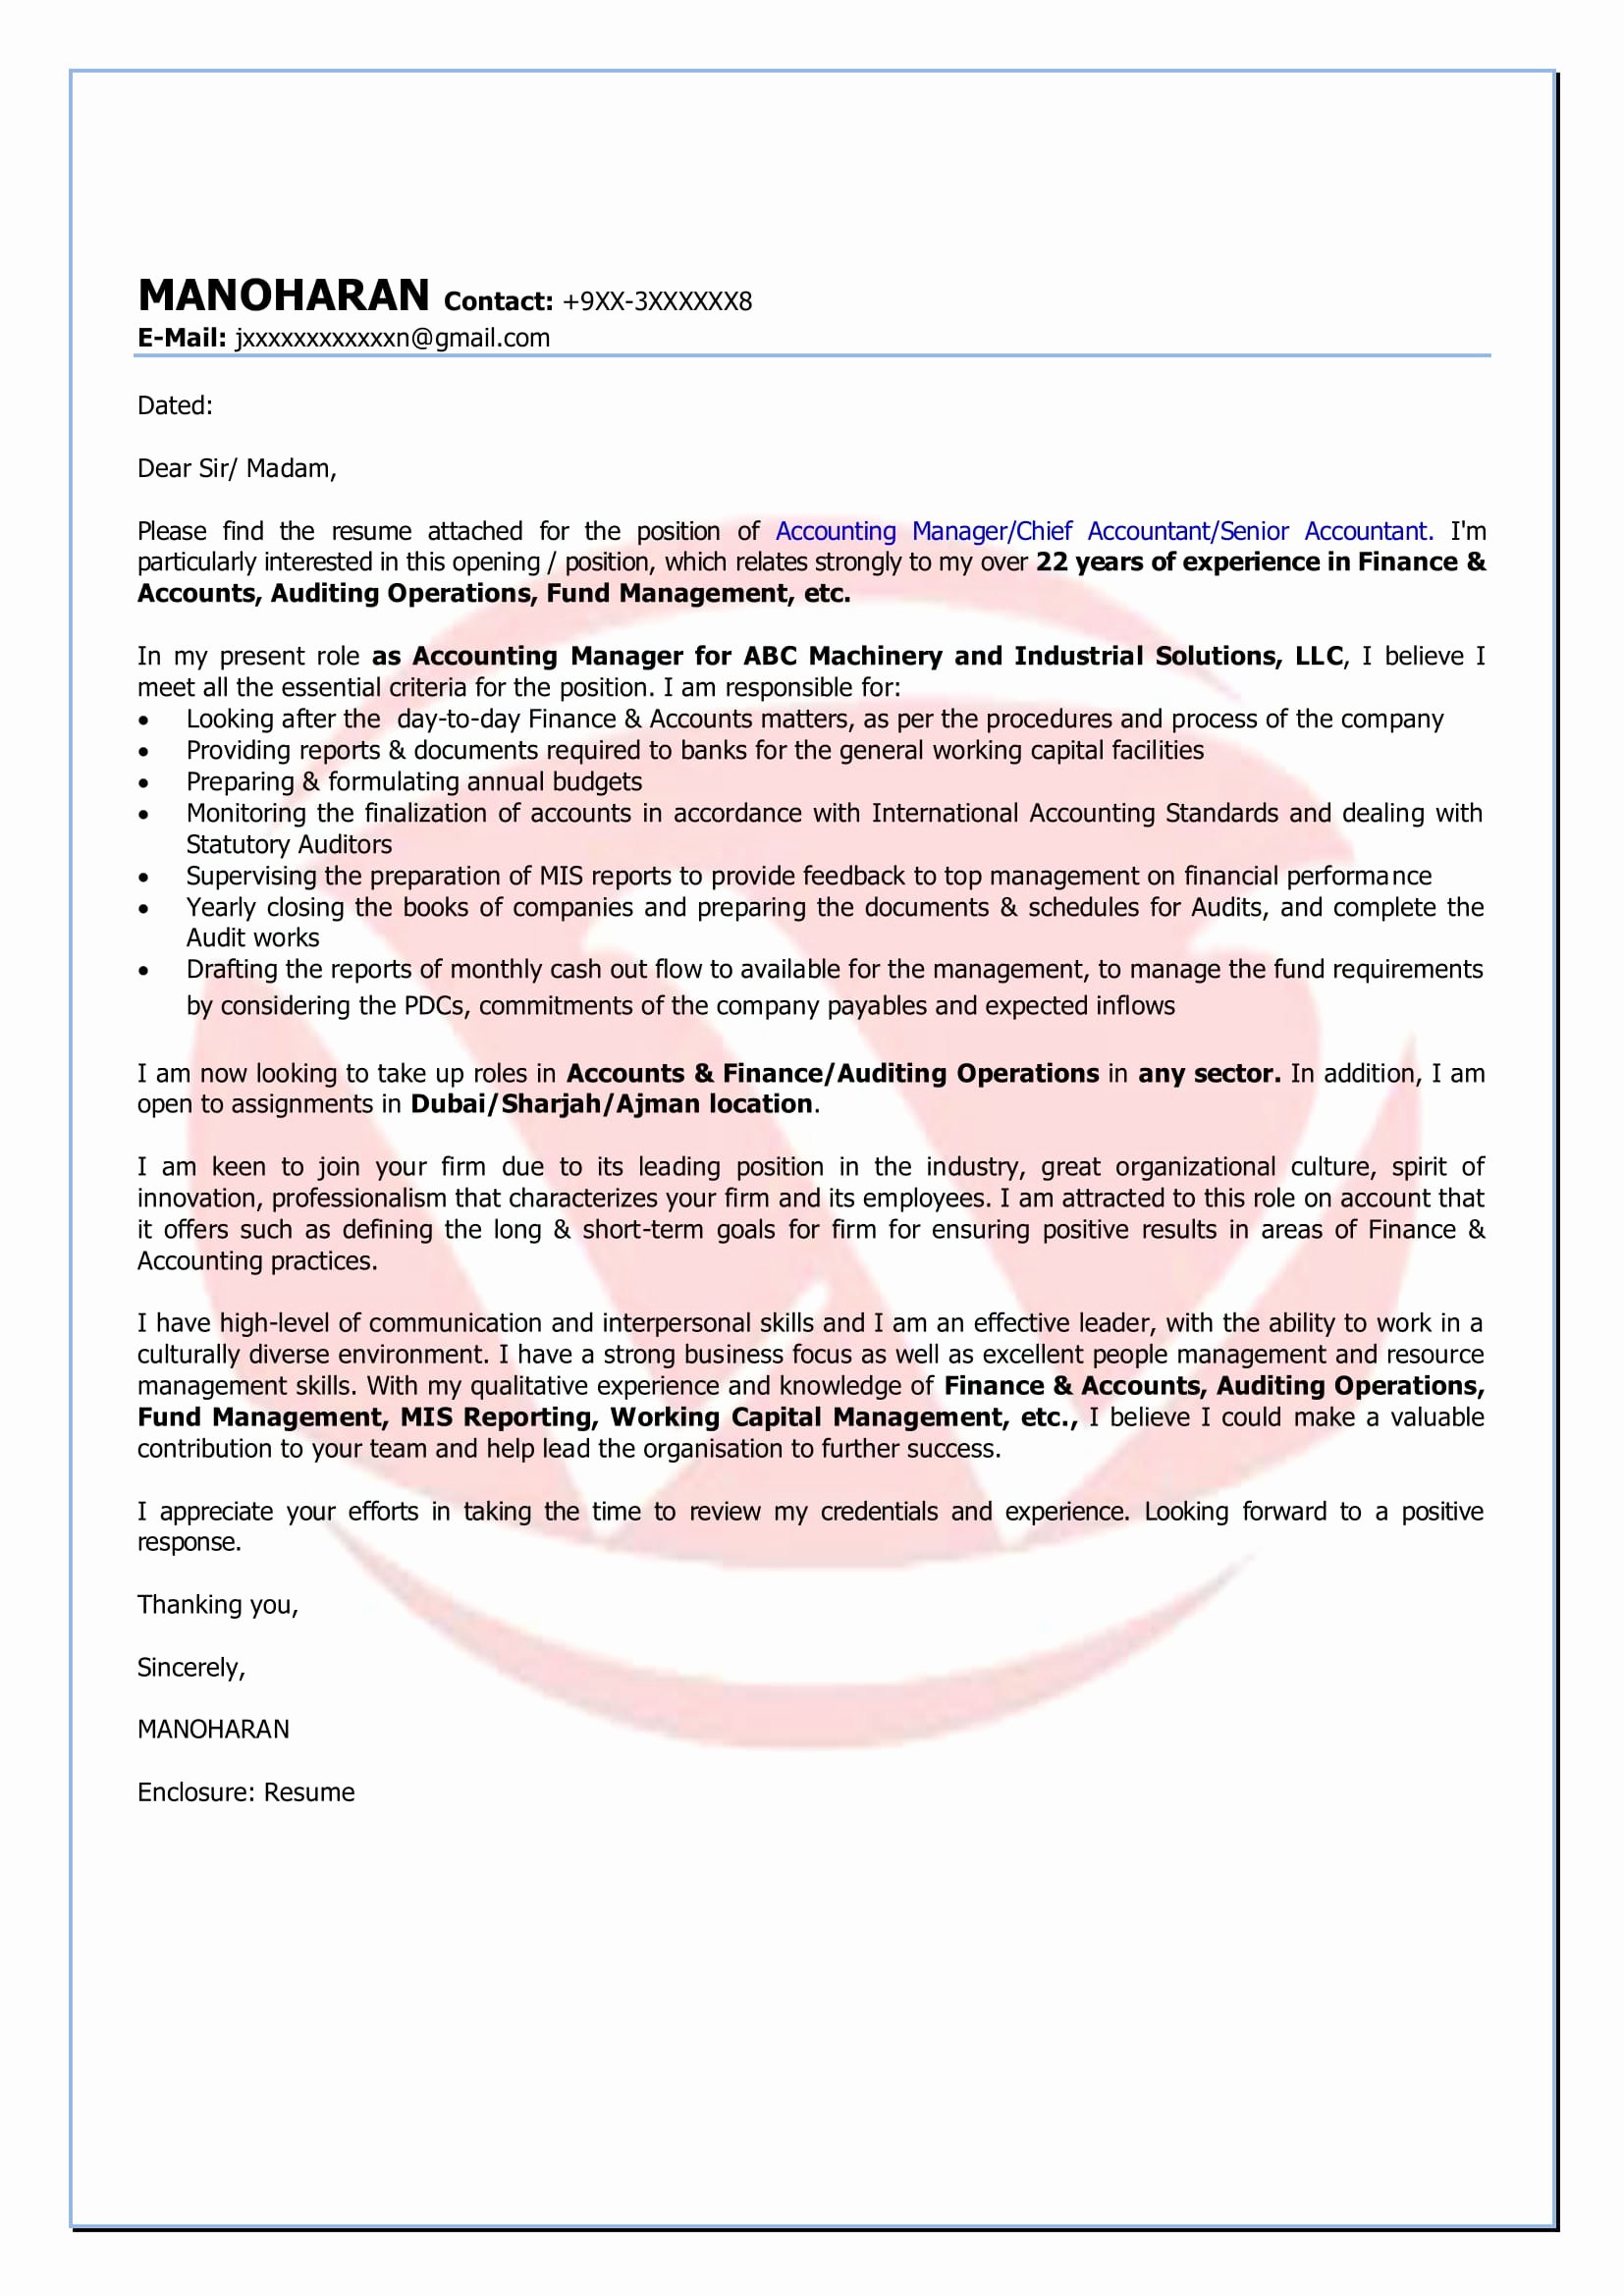 Accounting Job Cover Letter Fresh Accounting Sample Cover Letter format Download Cover